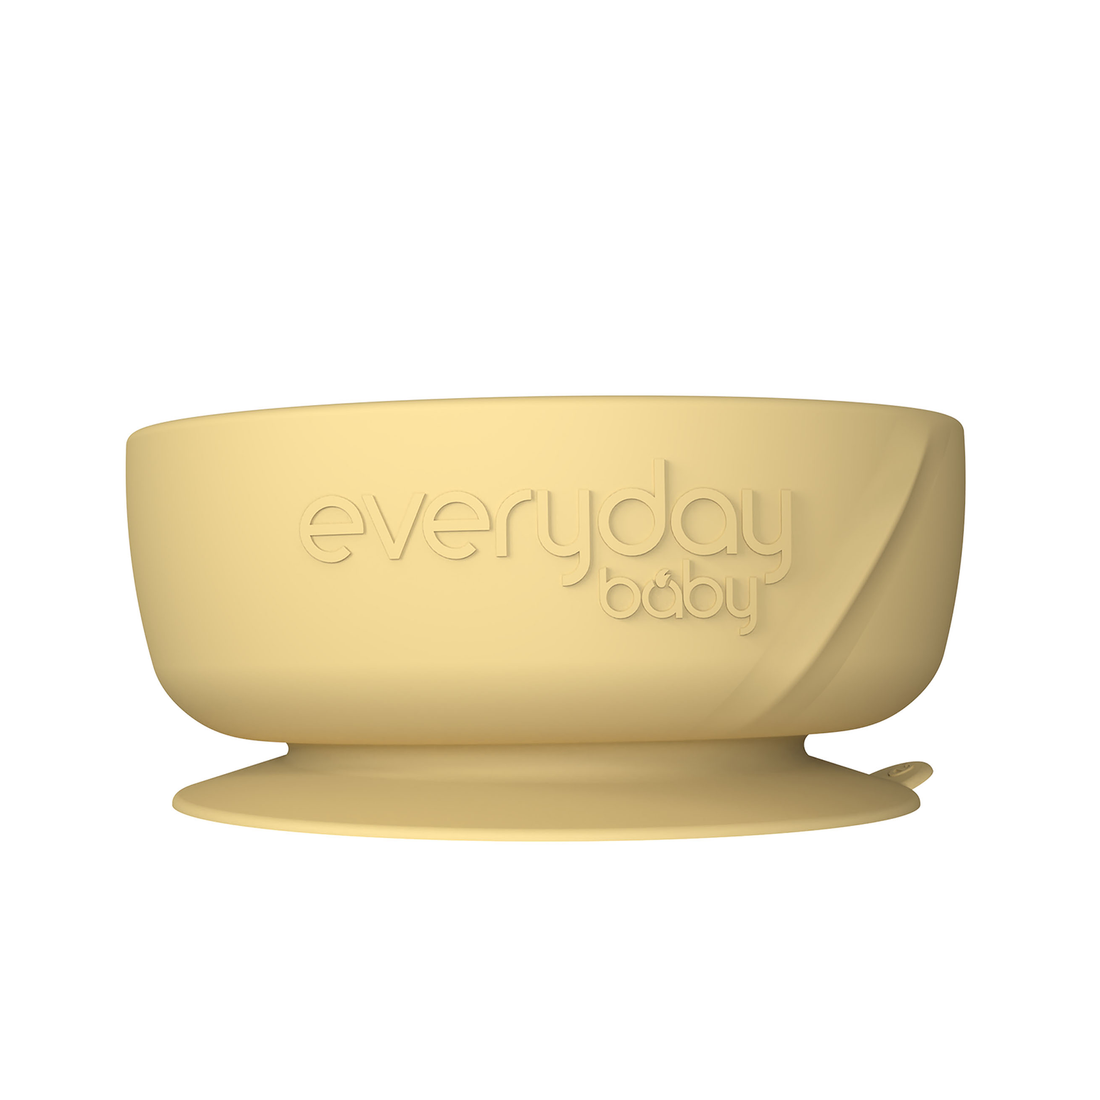 Everyday Baby Skål I Silikon med Sugfunktion Soft Yellow  1-pack